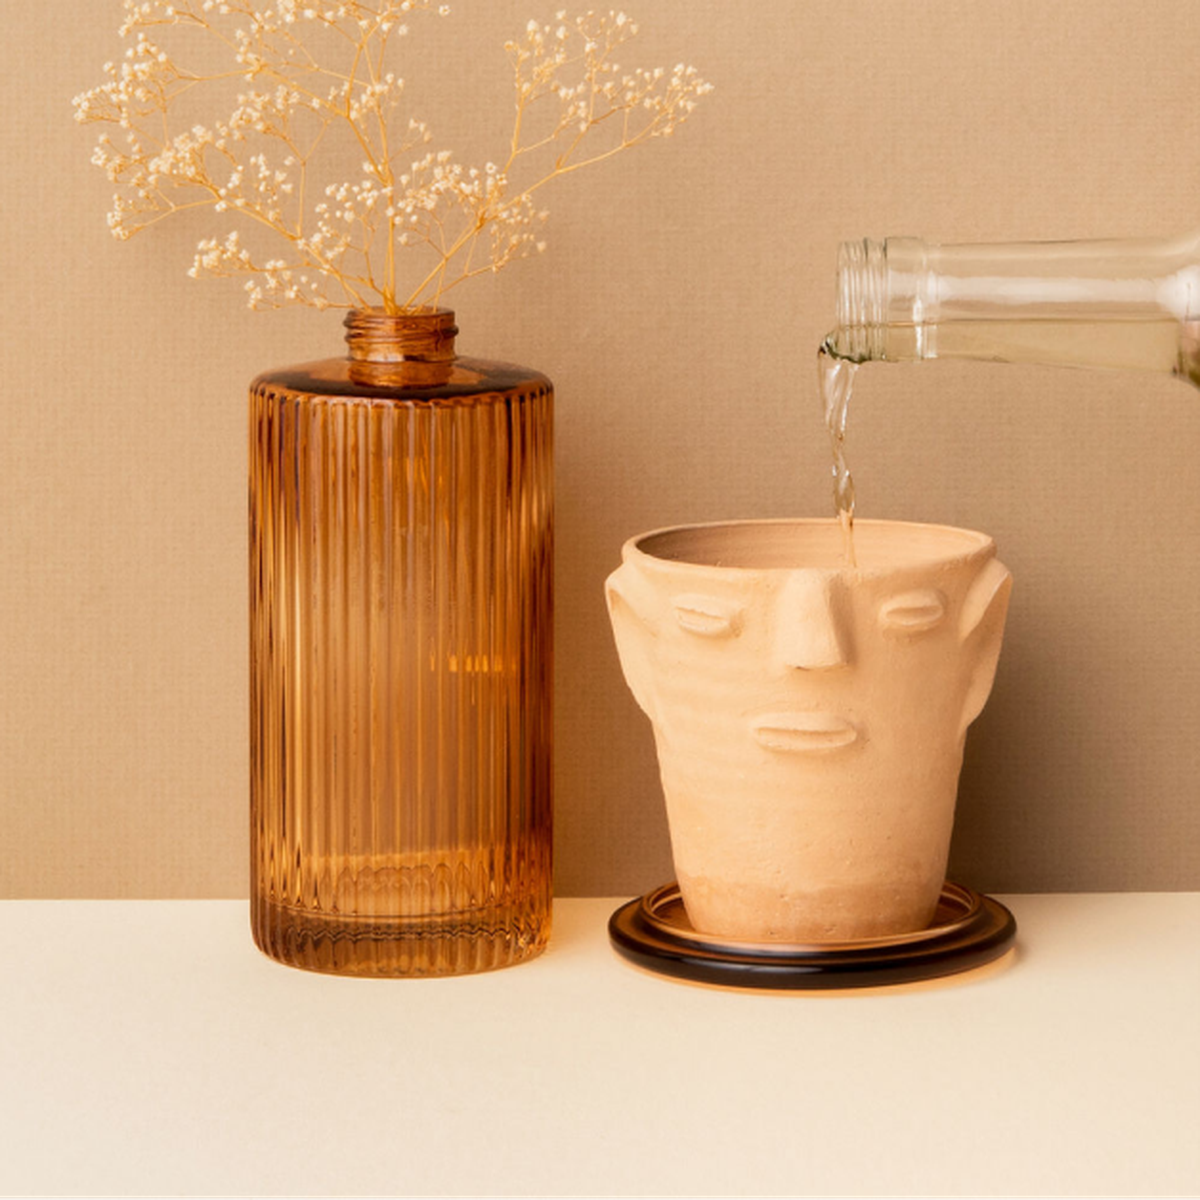 A ceramic cup with a face on it next to a bottle